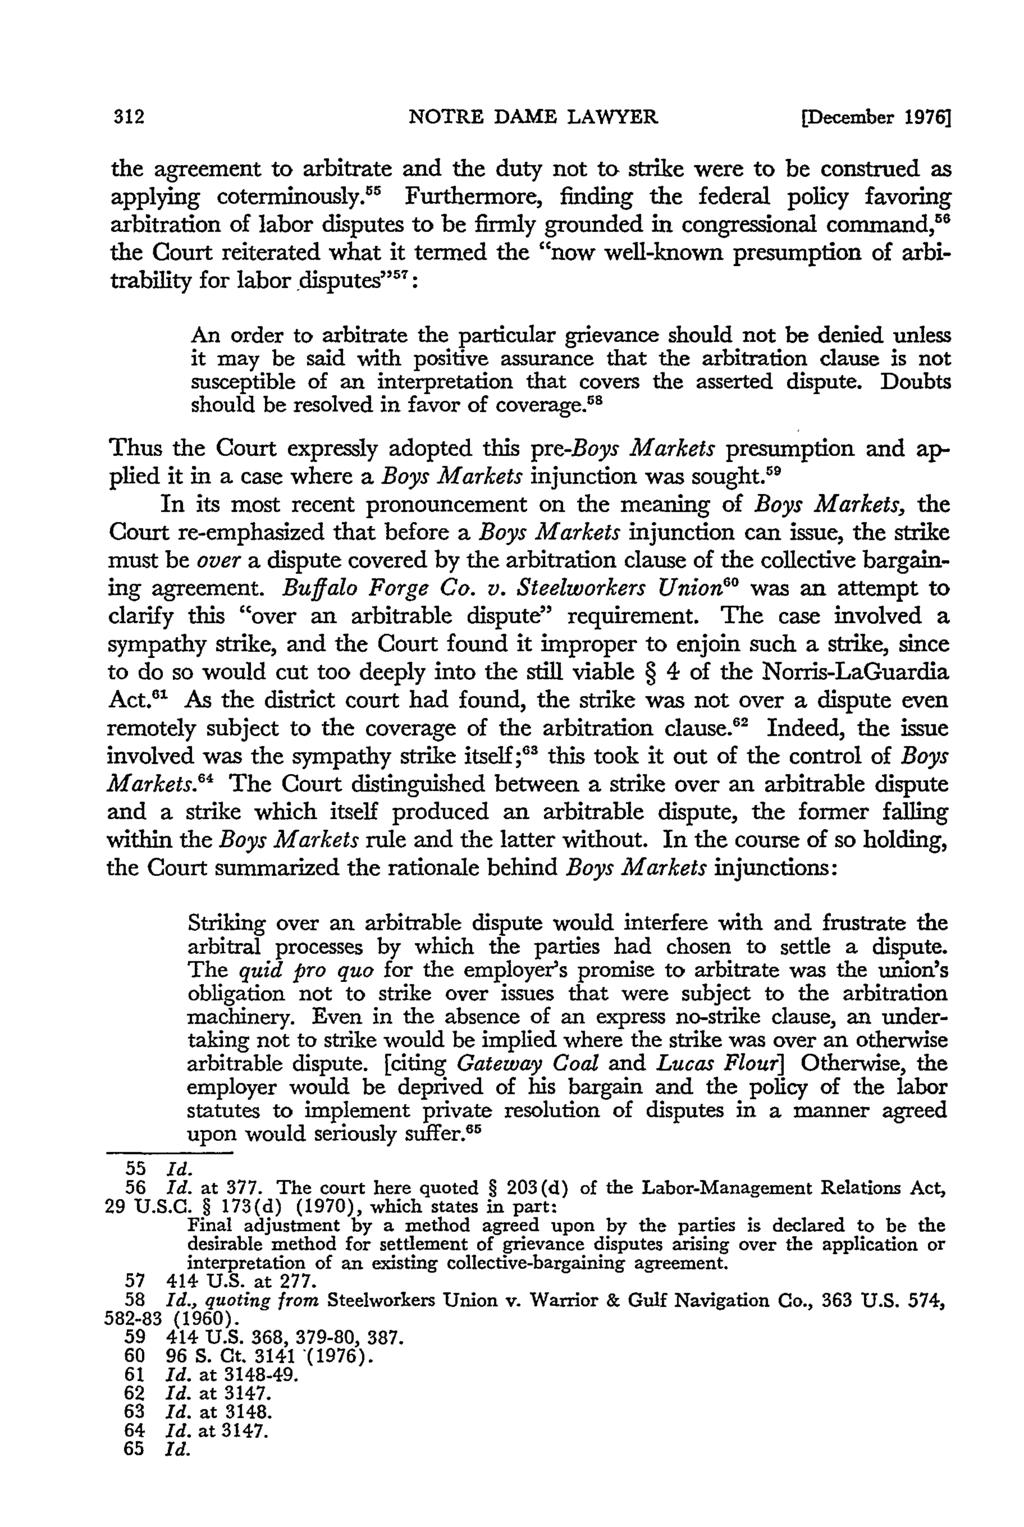 NOTRE DAME LAWYER [December 1976] the agreement to arbitrate and the duty not to strike were to be construed as applying coterminously.